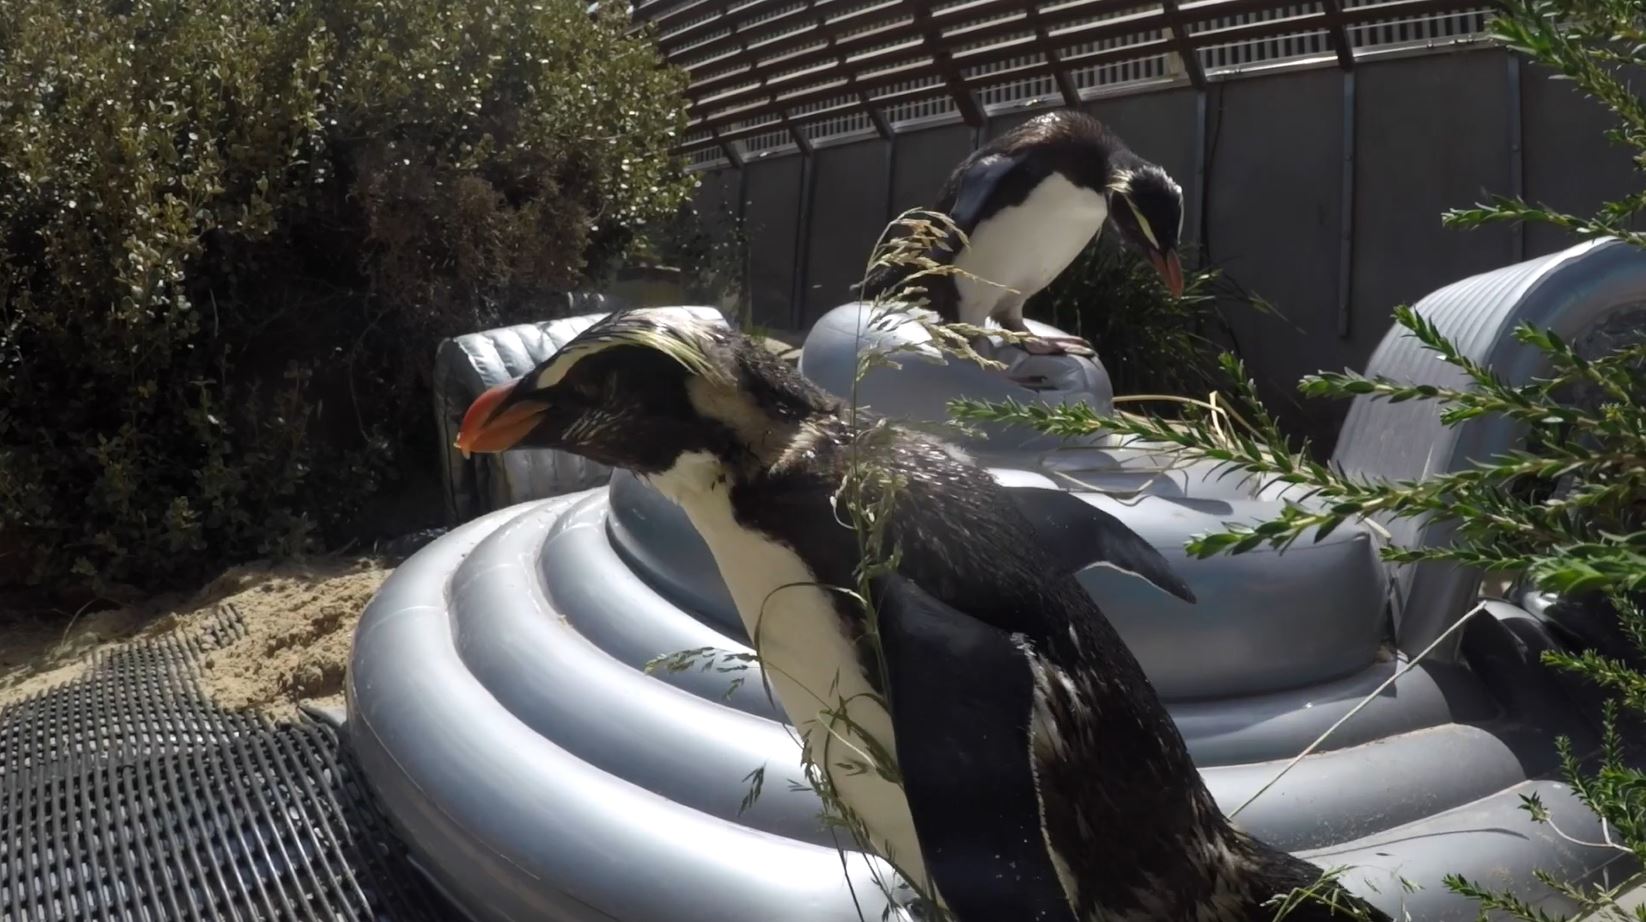 Jumping Castle fun for penguins at Melbourne Zoo